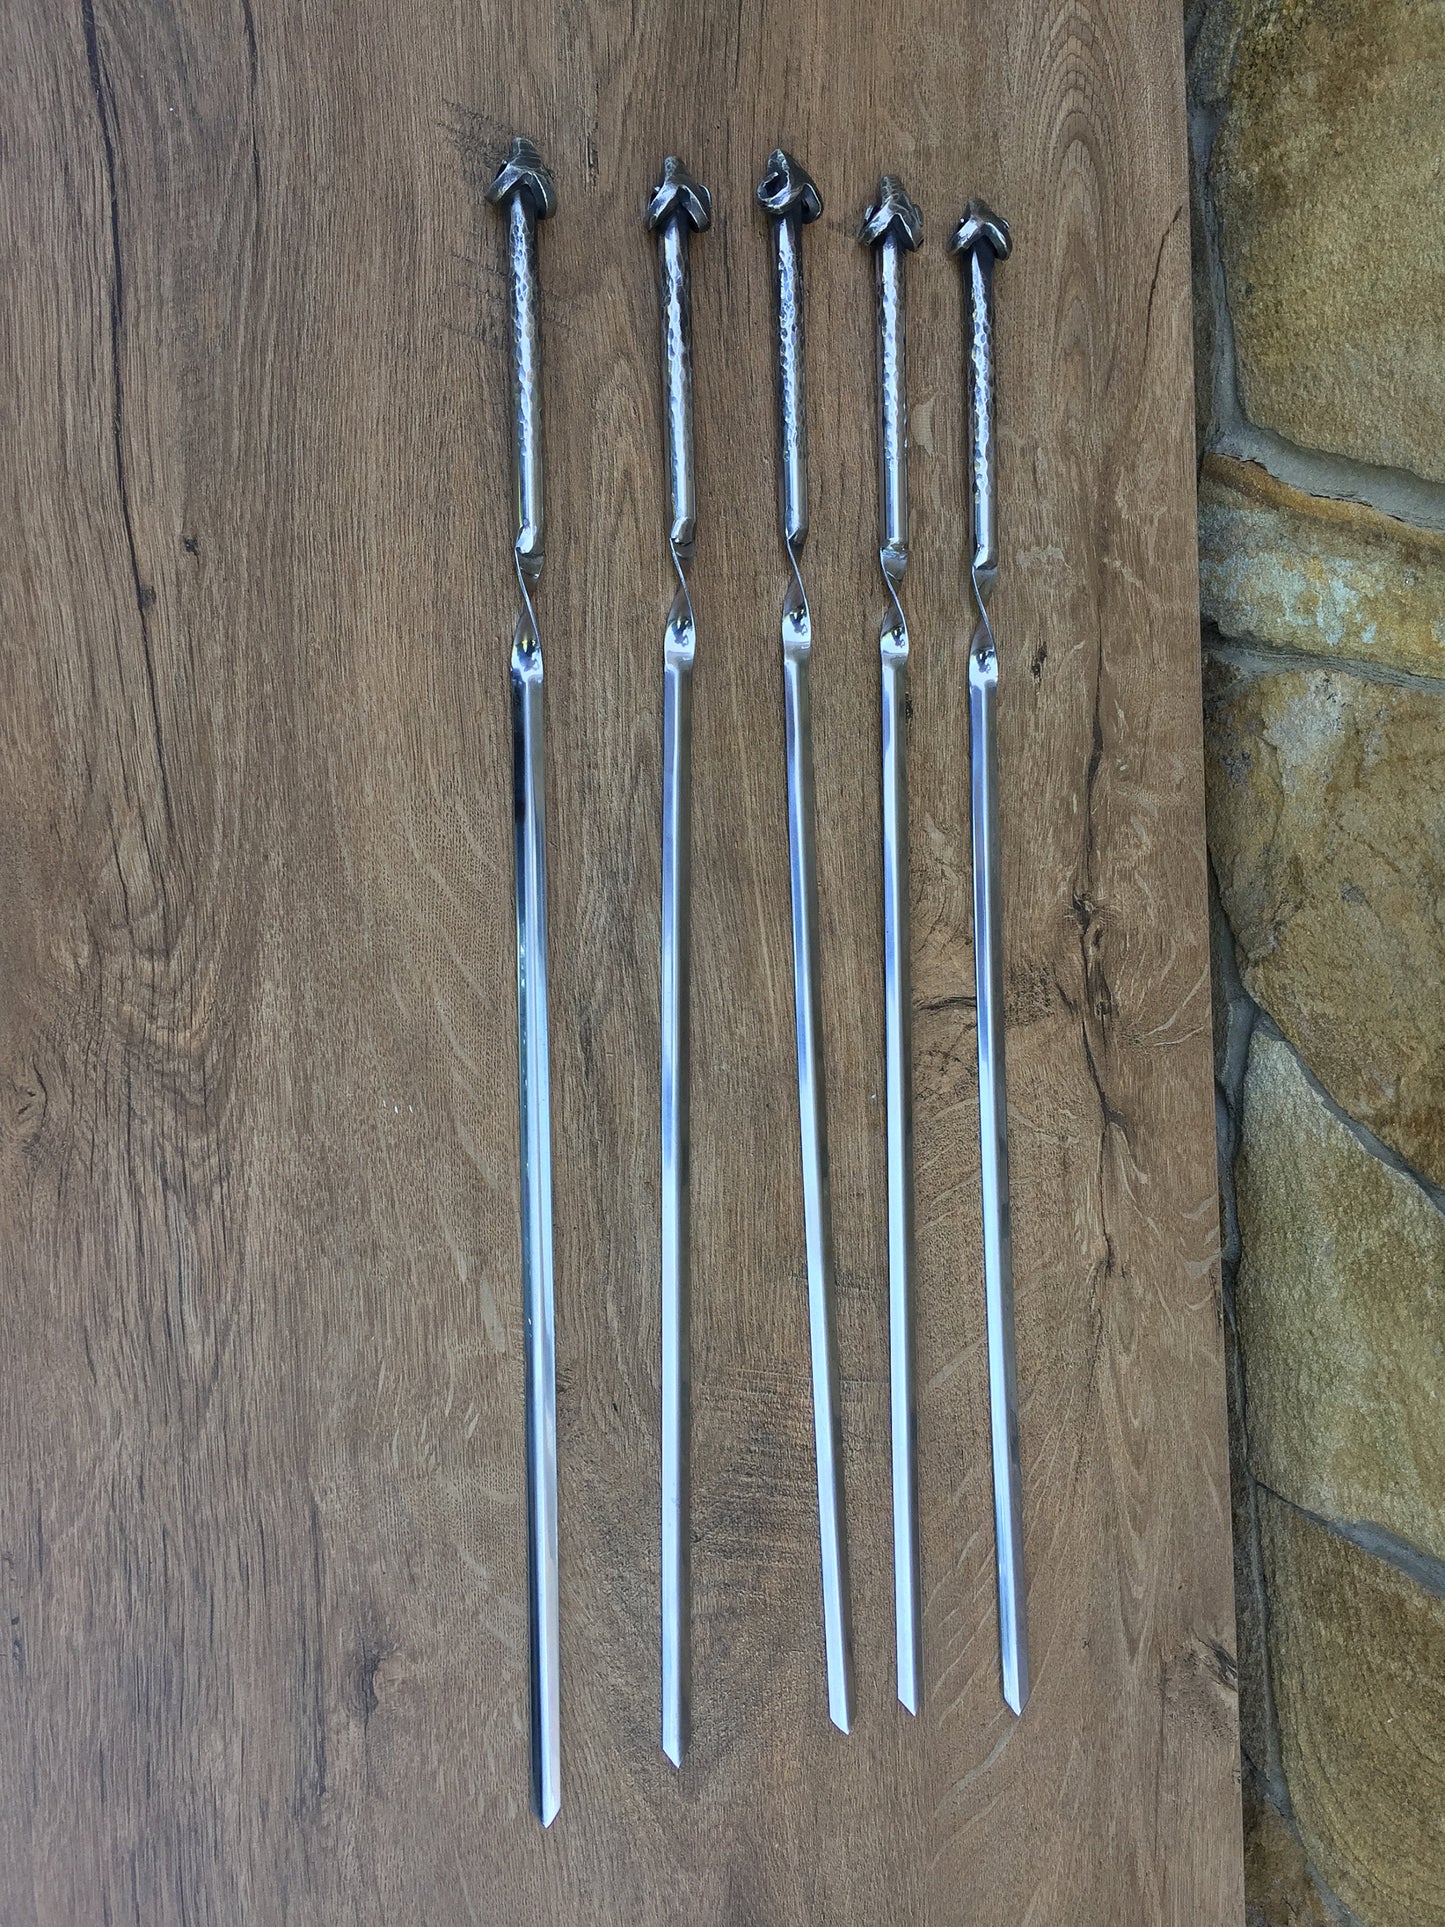 Stainless steel skewers, iron gift, iron anniversary, shish kabob, kebab skewers, spatula, grill tools, grilling gifts, grill set, fork